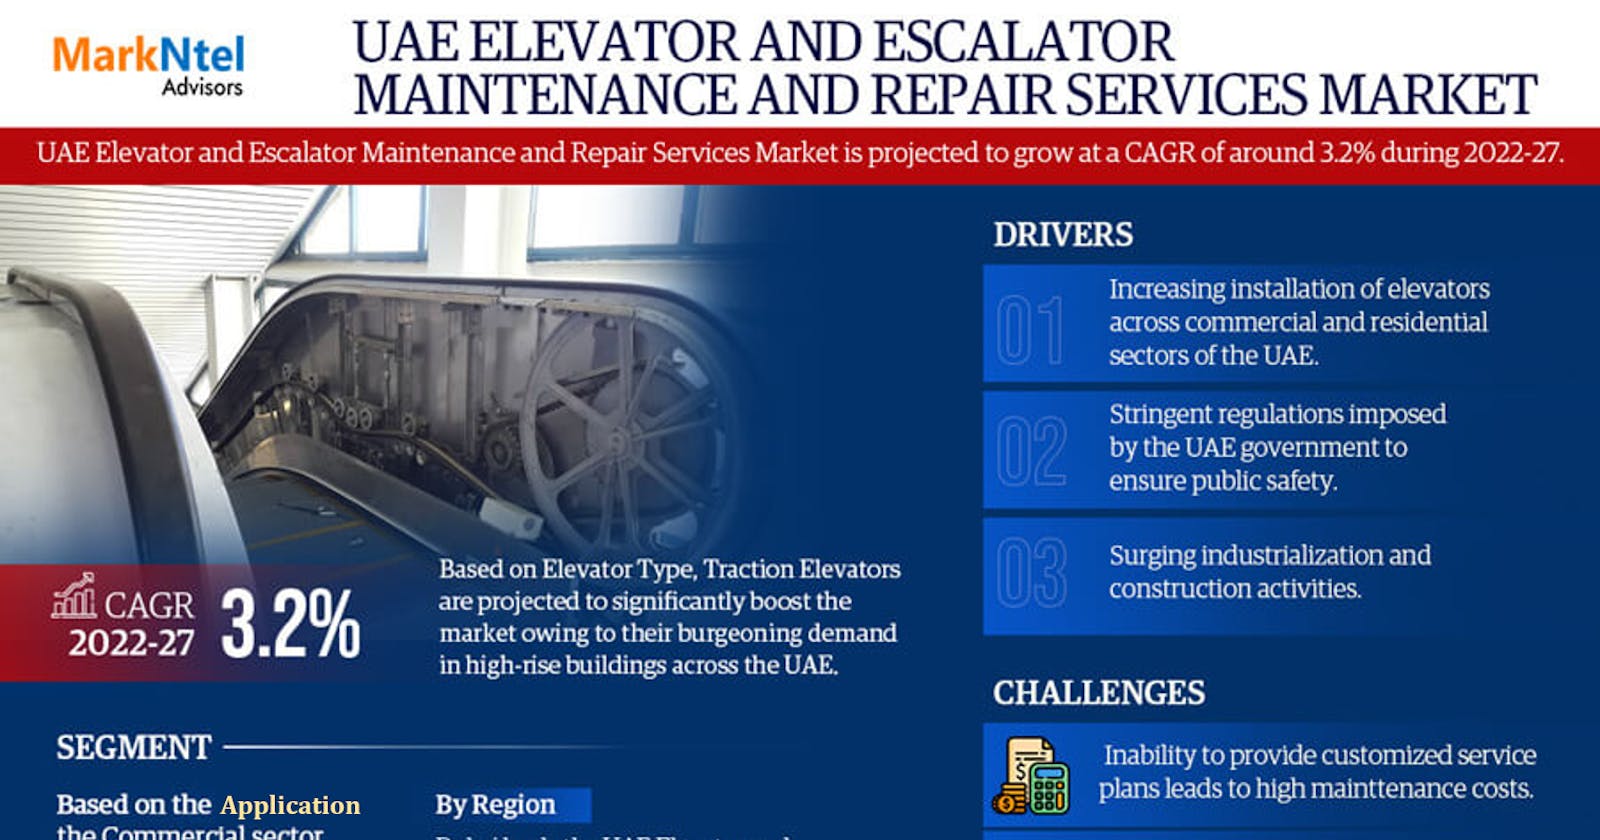 UAE Elevator and Escalator Maintenance and Repair Services Market Forecasts 3.2% CAGR Growth Through 2027